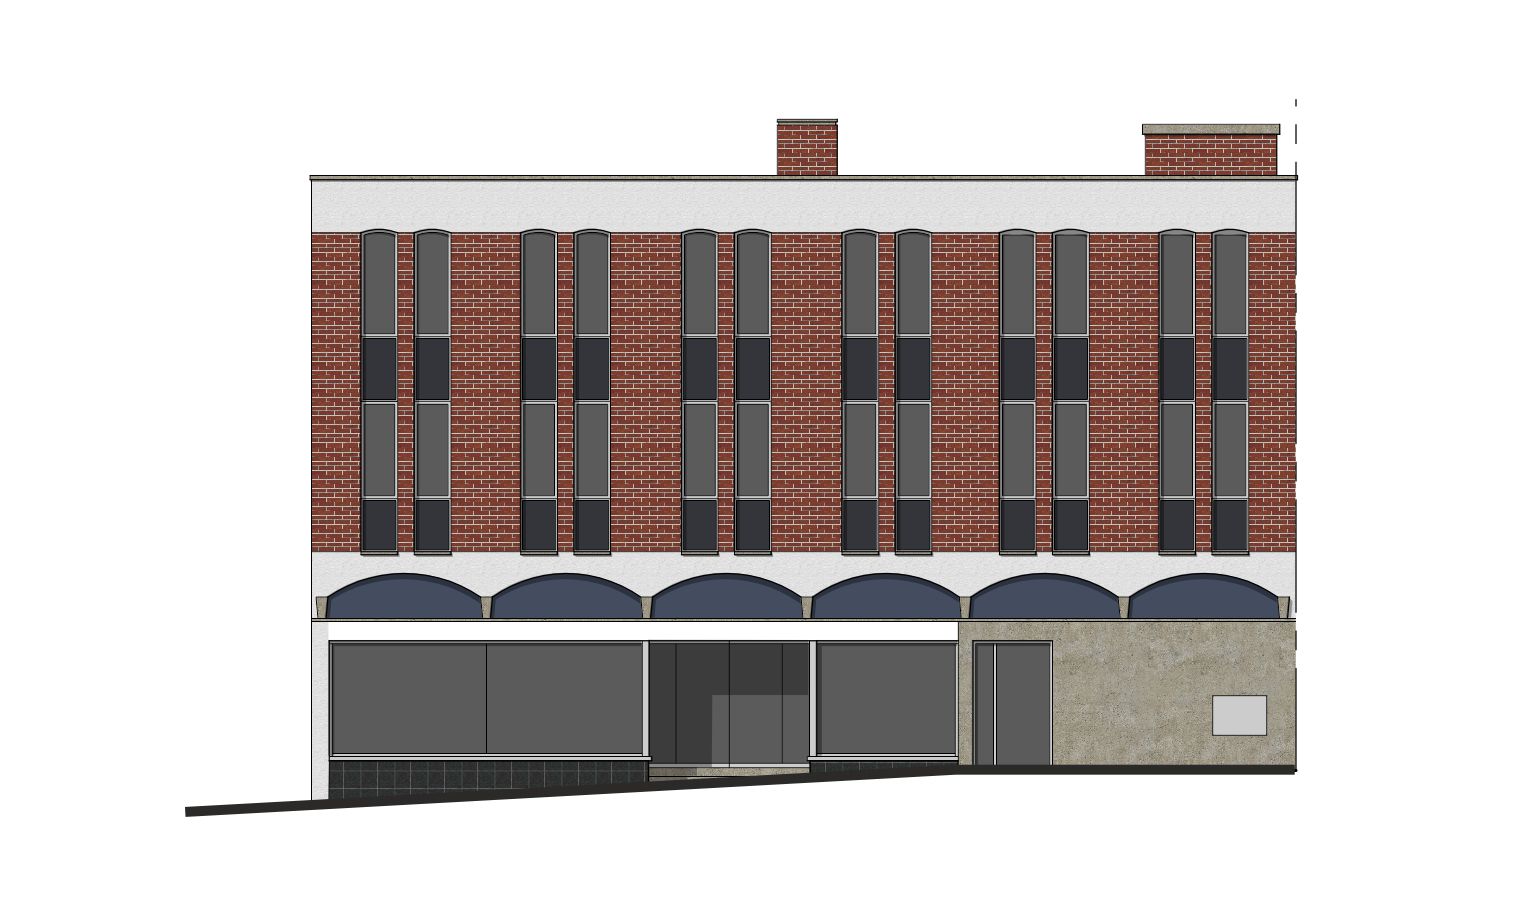 offices converted to flats prior notification existing front drawings swindon planning application